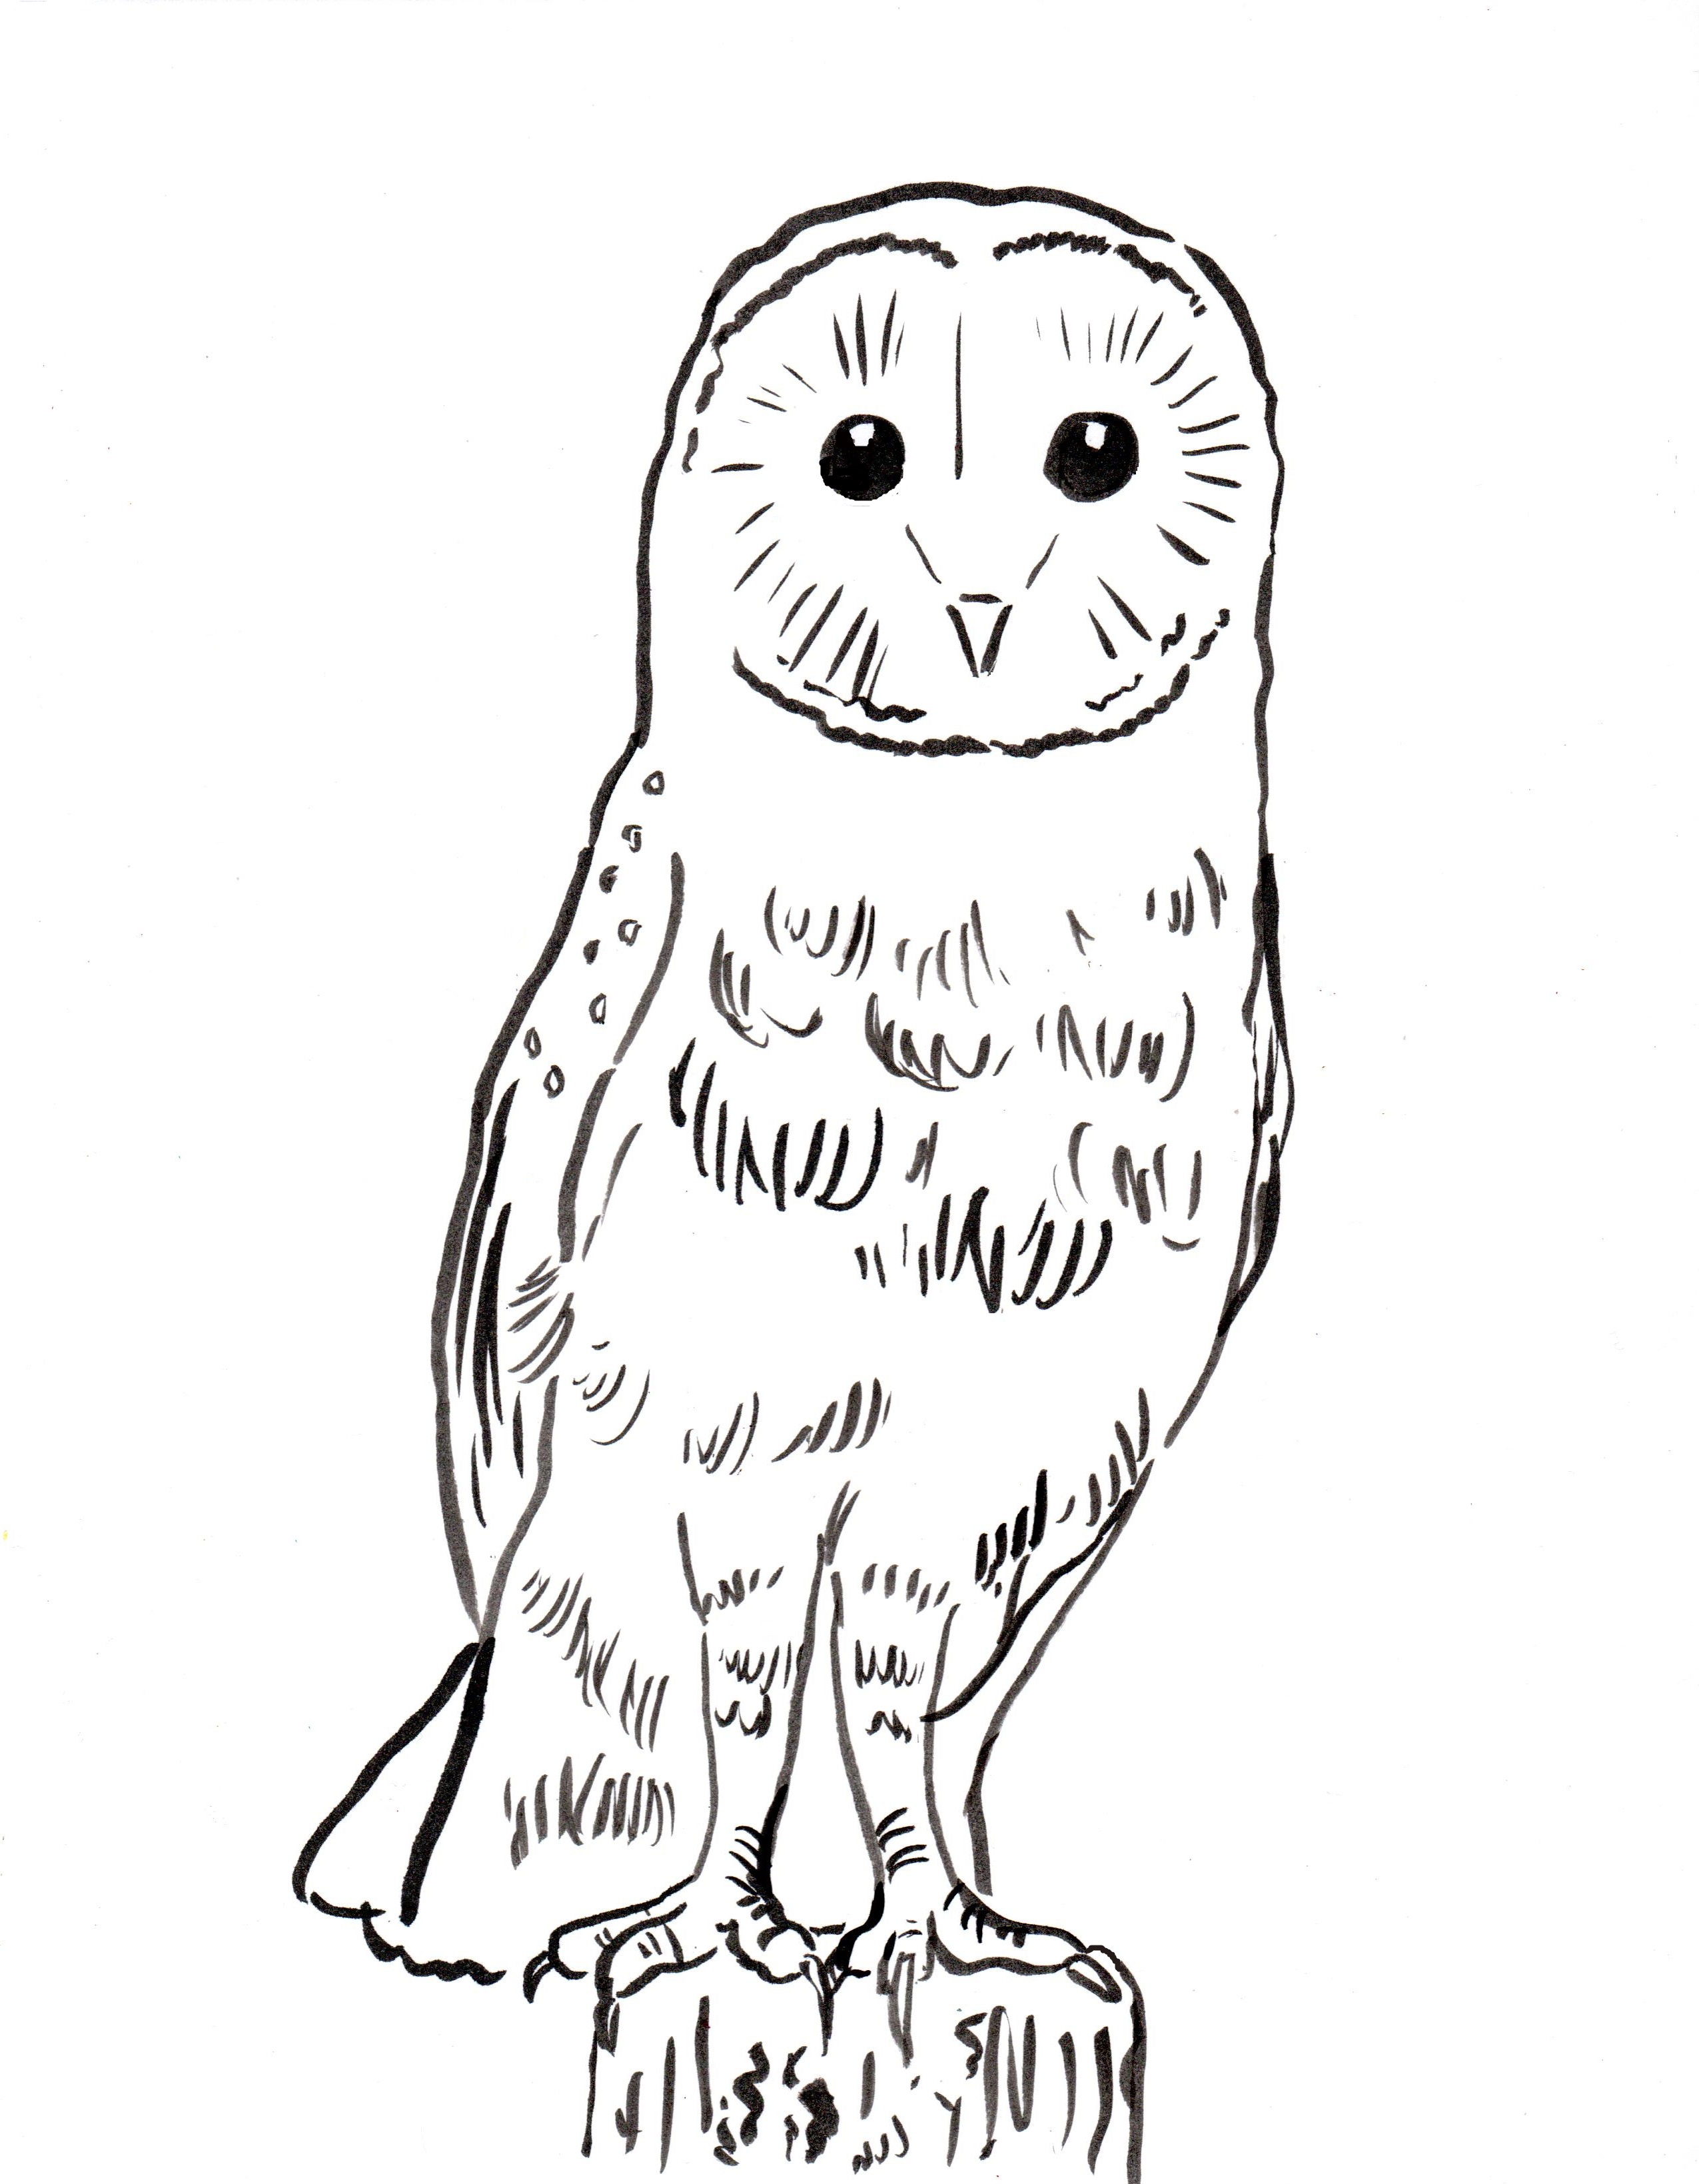 Barn Owl Coloring Page - Art Starts